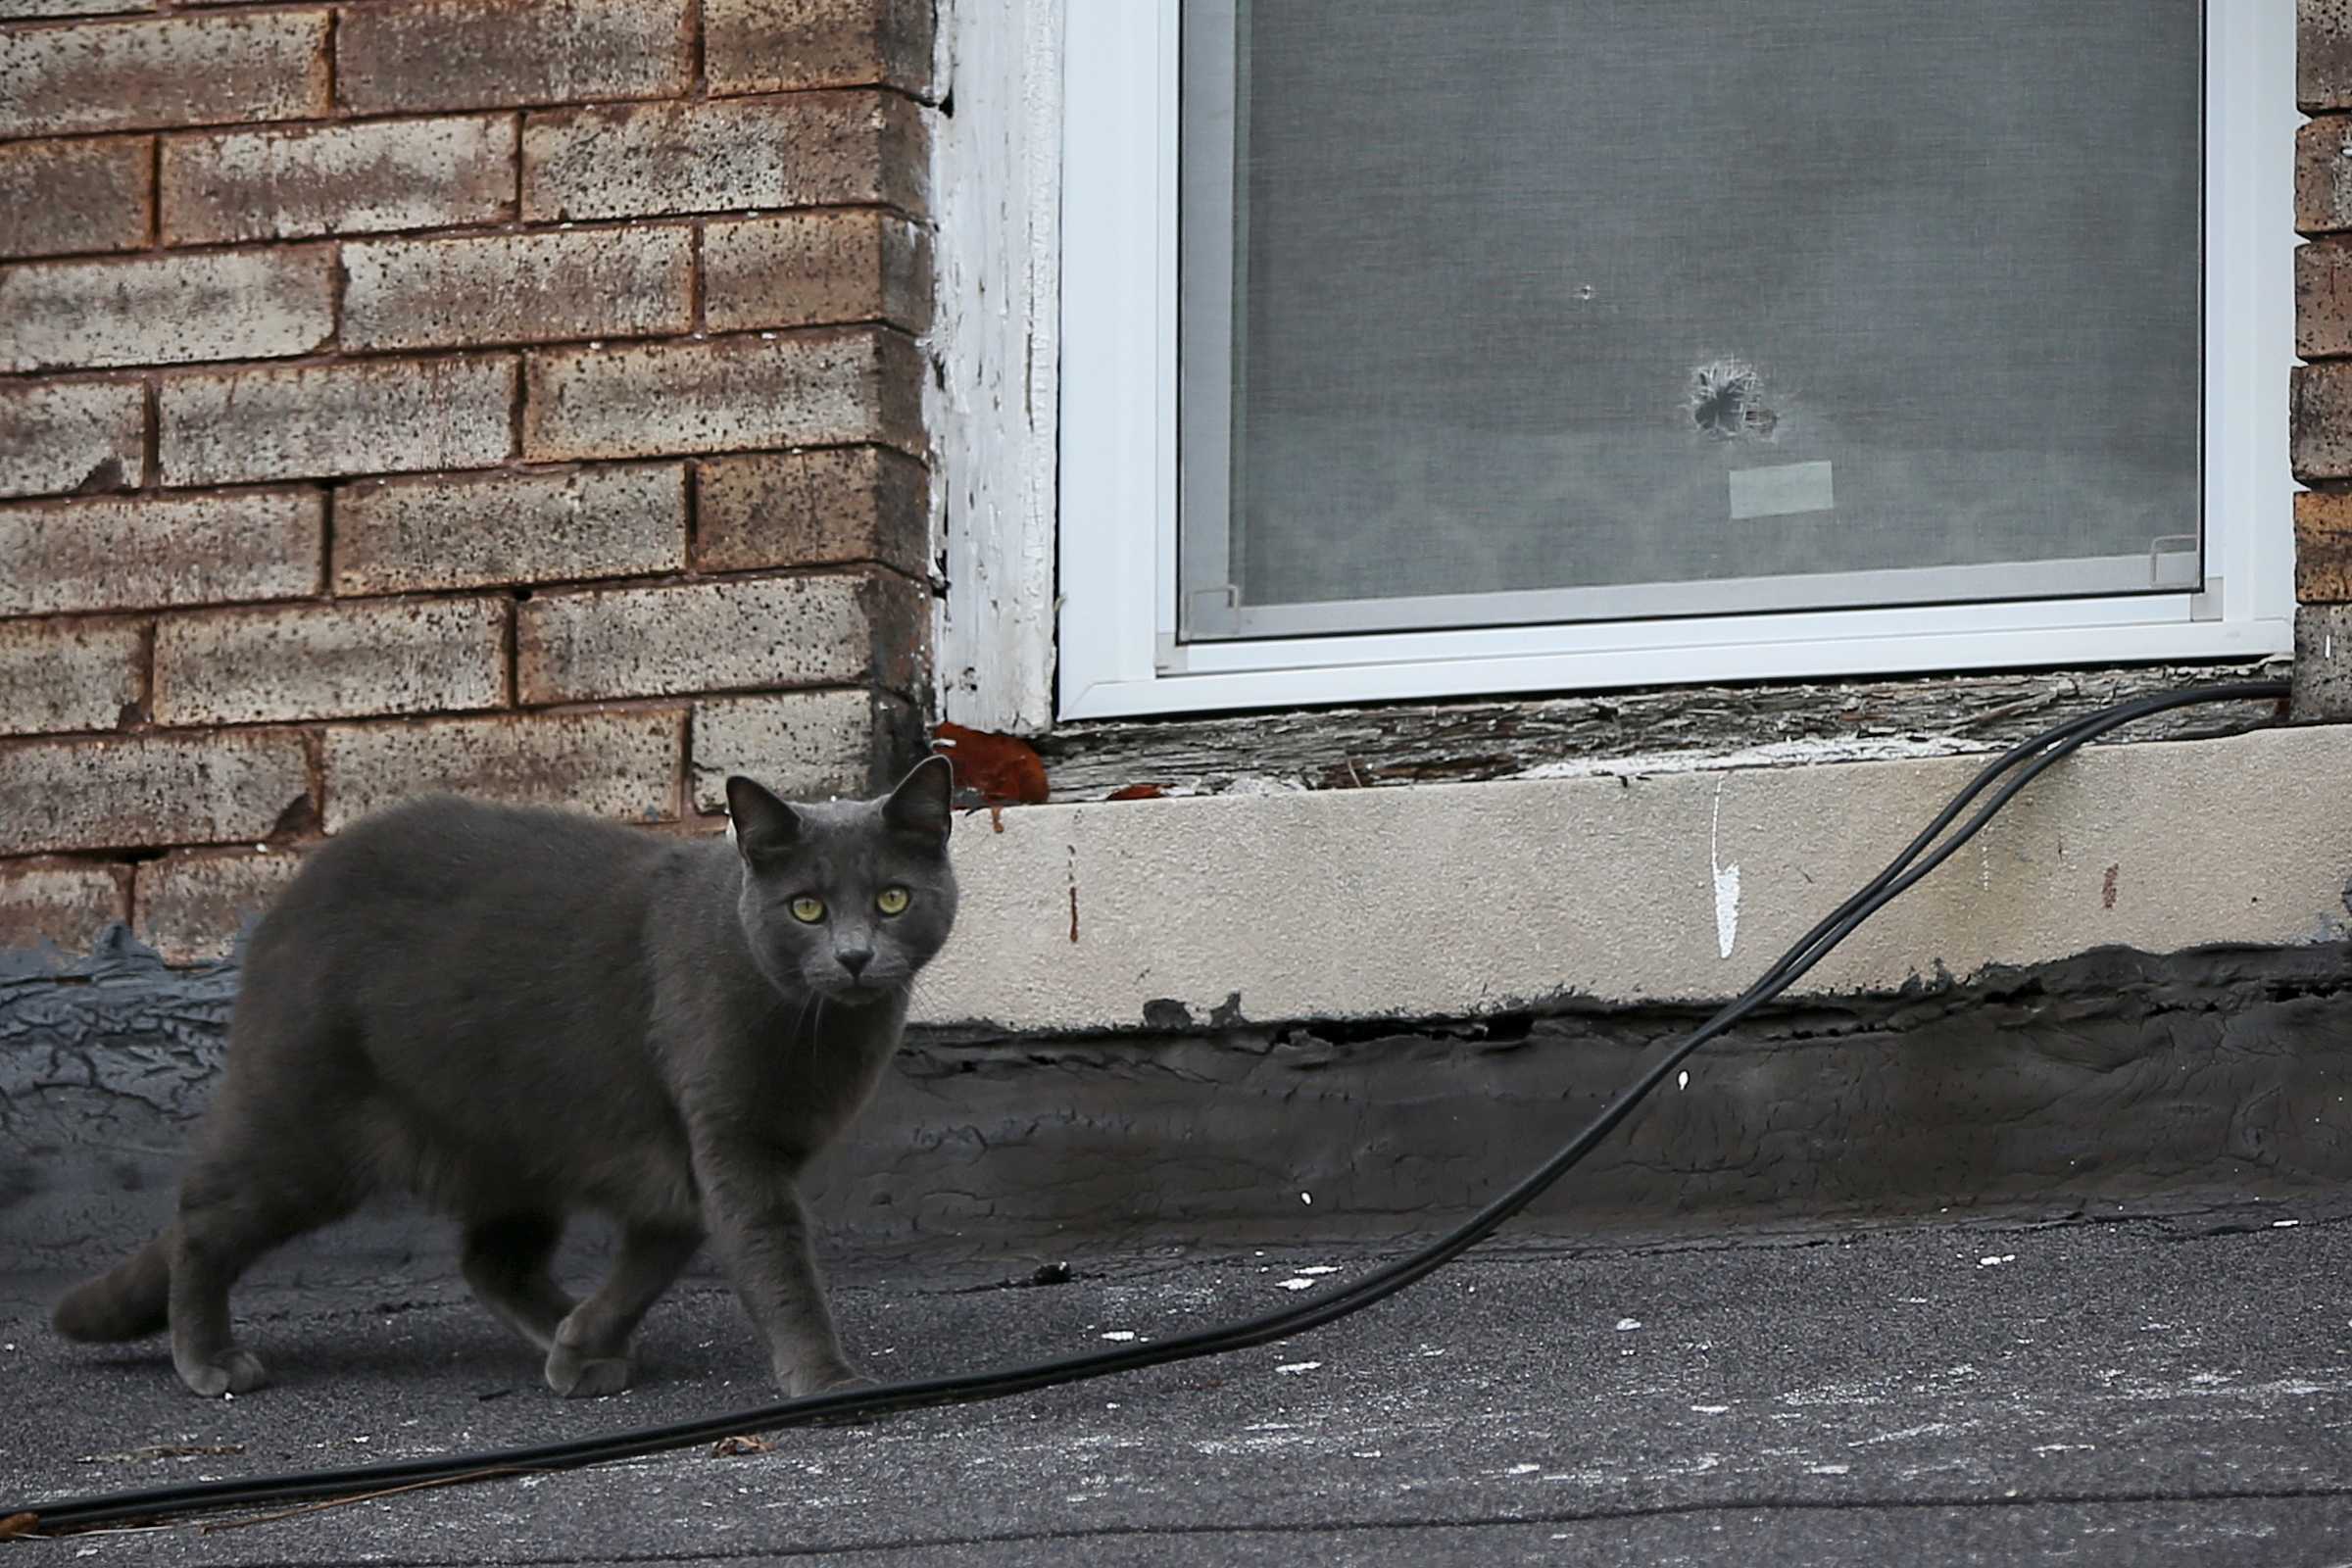 A cat walks past a bullet hole in an upstairs window of a home where a woman was fatally shot overnight in the 6300 block of North Woodstock Street in North Philadelphia on Friday, Dec. 14, 2018. The woman was reportedly shot next to her newborn infant.